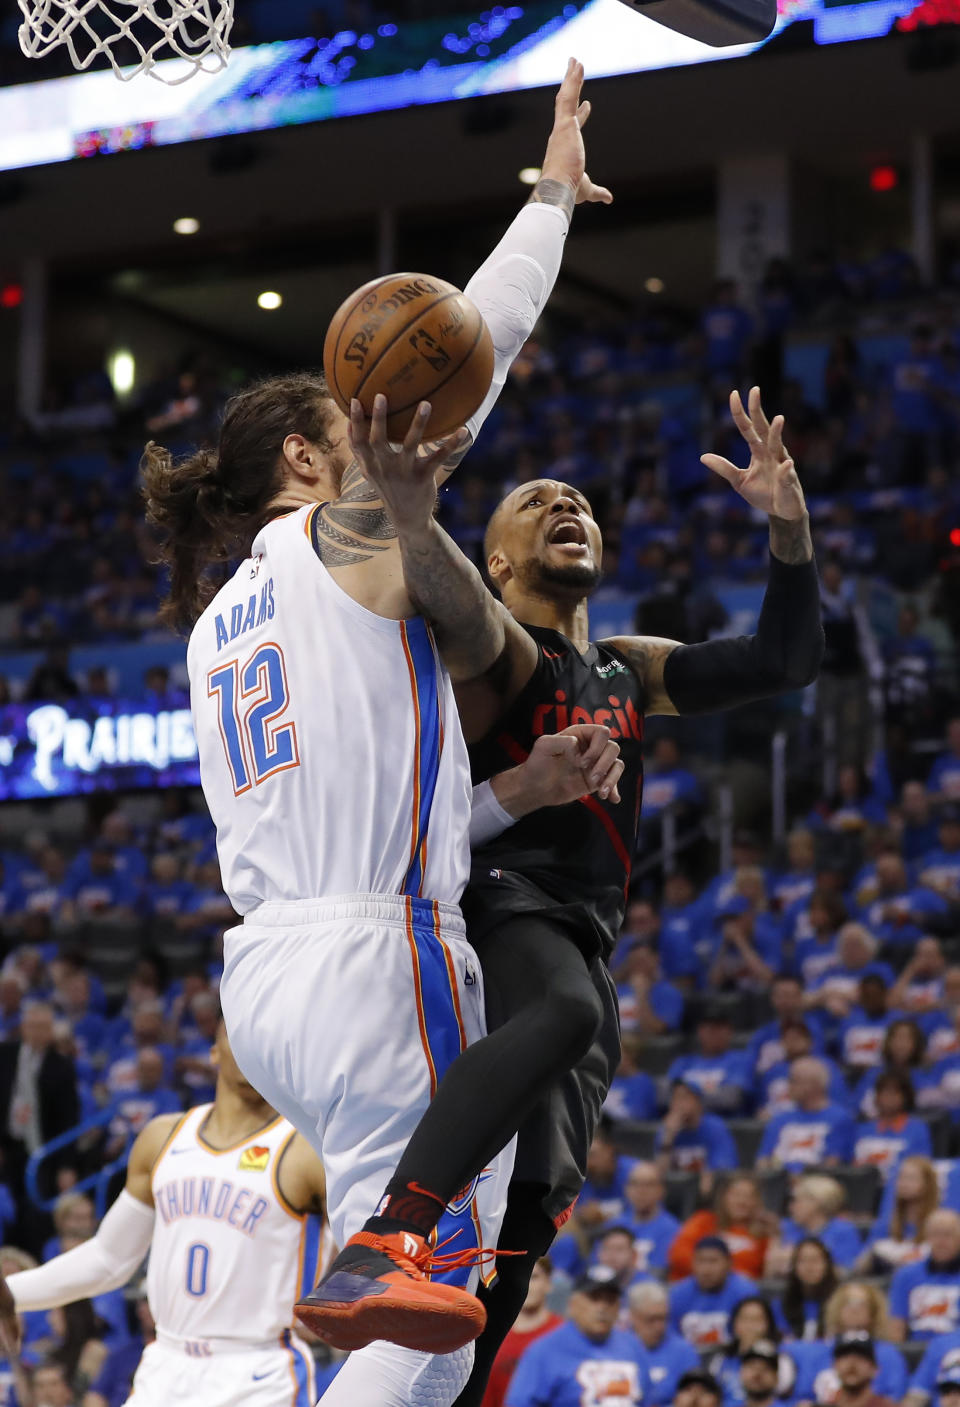 Portland Trail Blazers guard Damian Lillard (0) goes to the basket as Oklahoma City Thunder center Steven Adams (12) defends in the second half of Game 4 of an NBA basketball first-round playoff series Sunday, April 21, 2019, in Oklahoma City. Portland won 111-98. (AP Photo/Alonzo Adams)